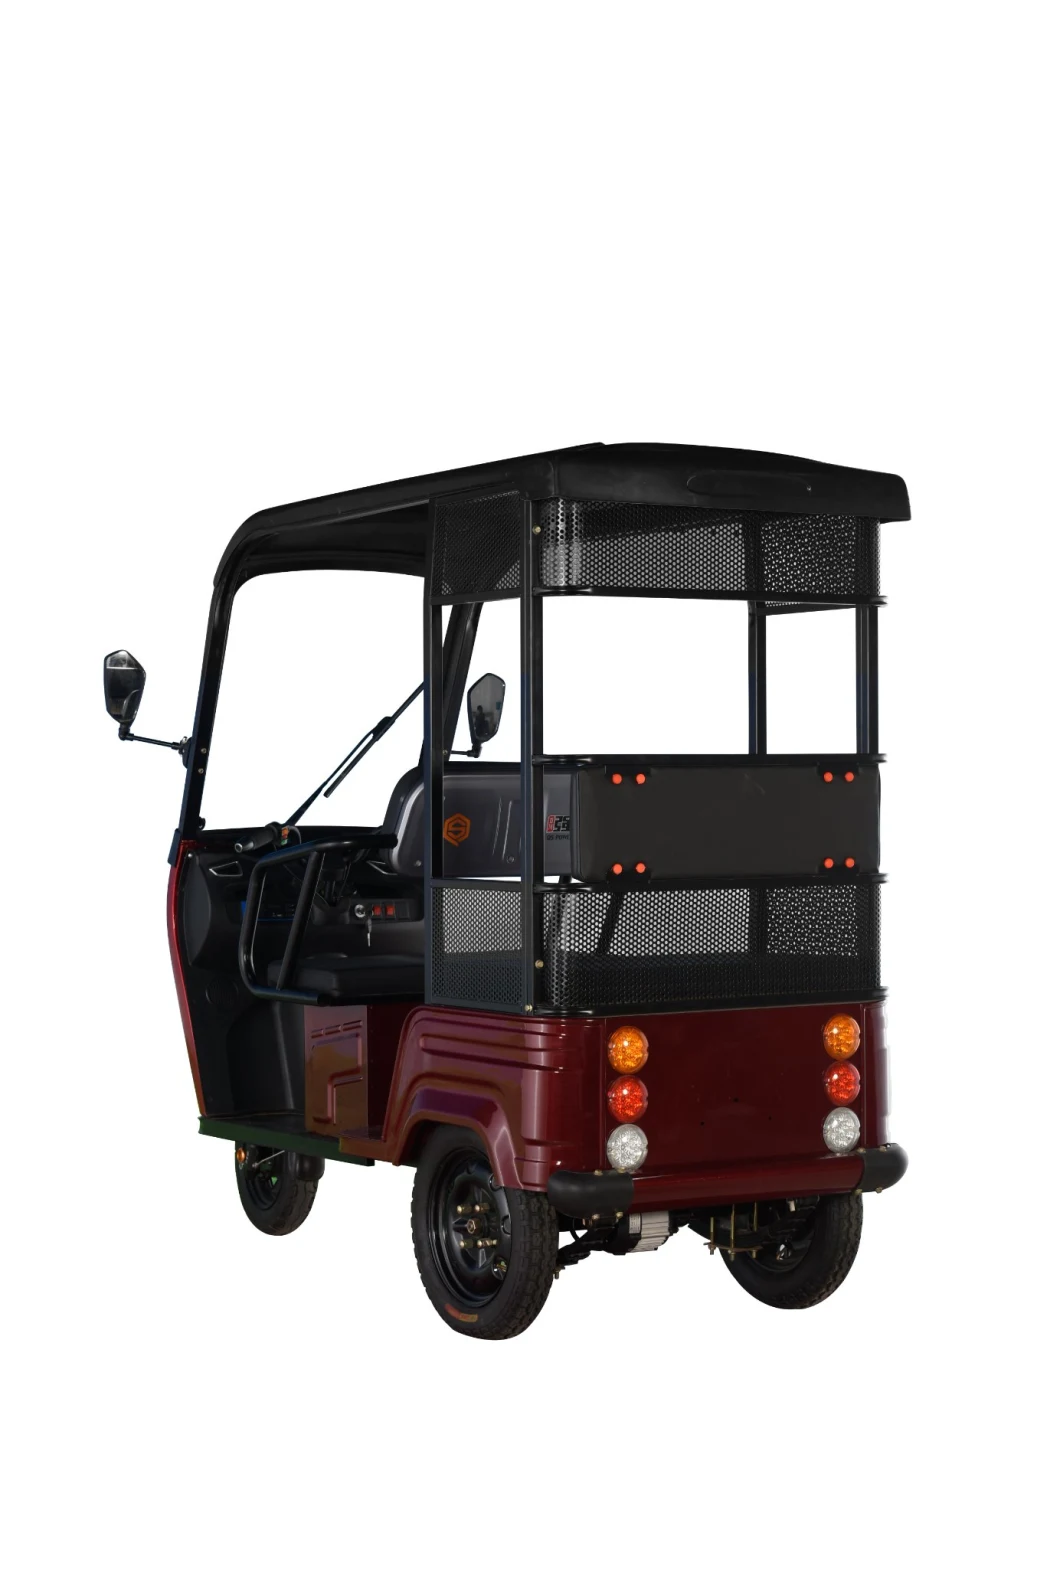 Chinese Wholesaler 600 Watt Electric Tricycle with Rain Roof 3 Wheels Motor Scooter with Cover for Sale